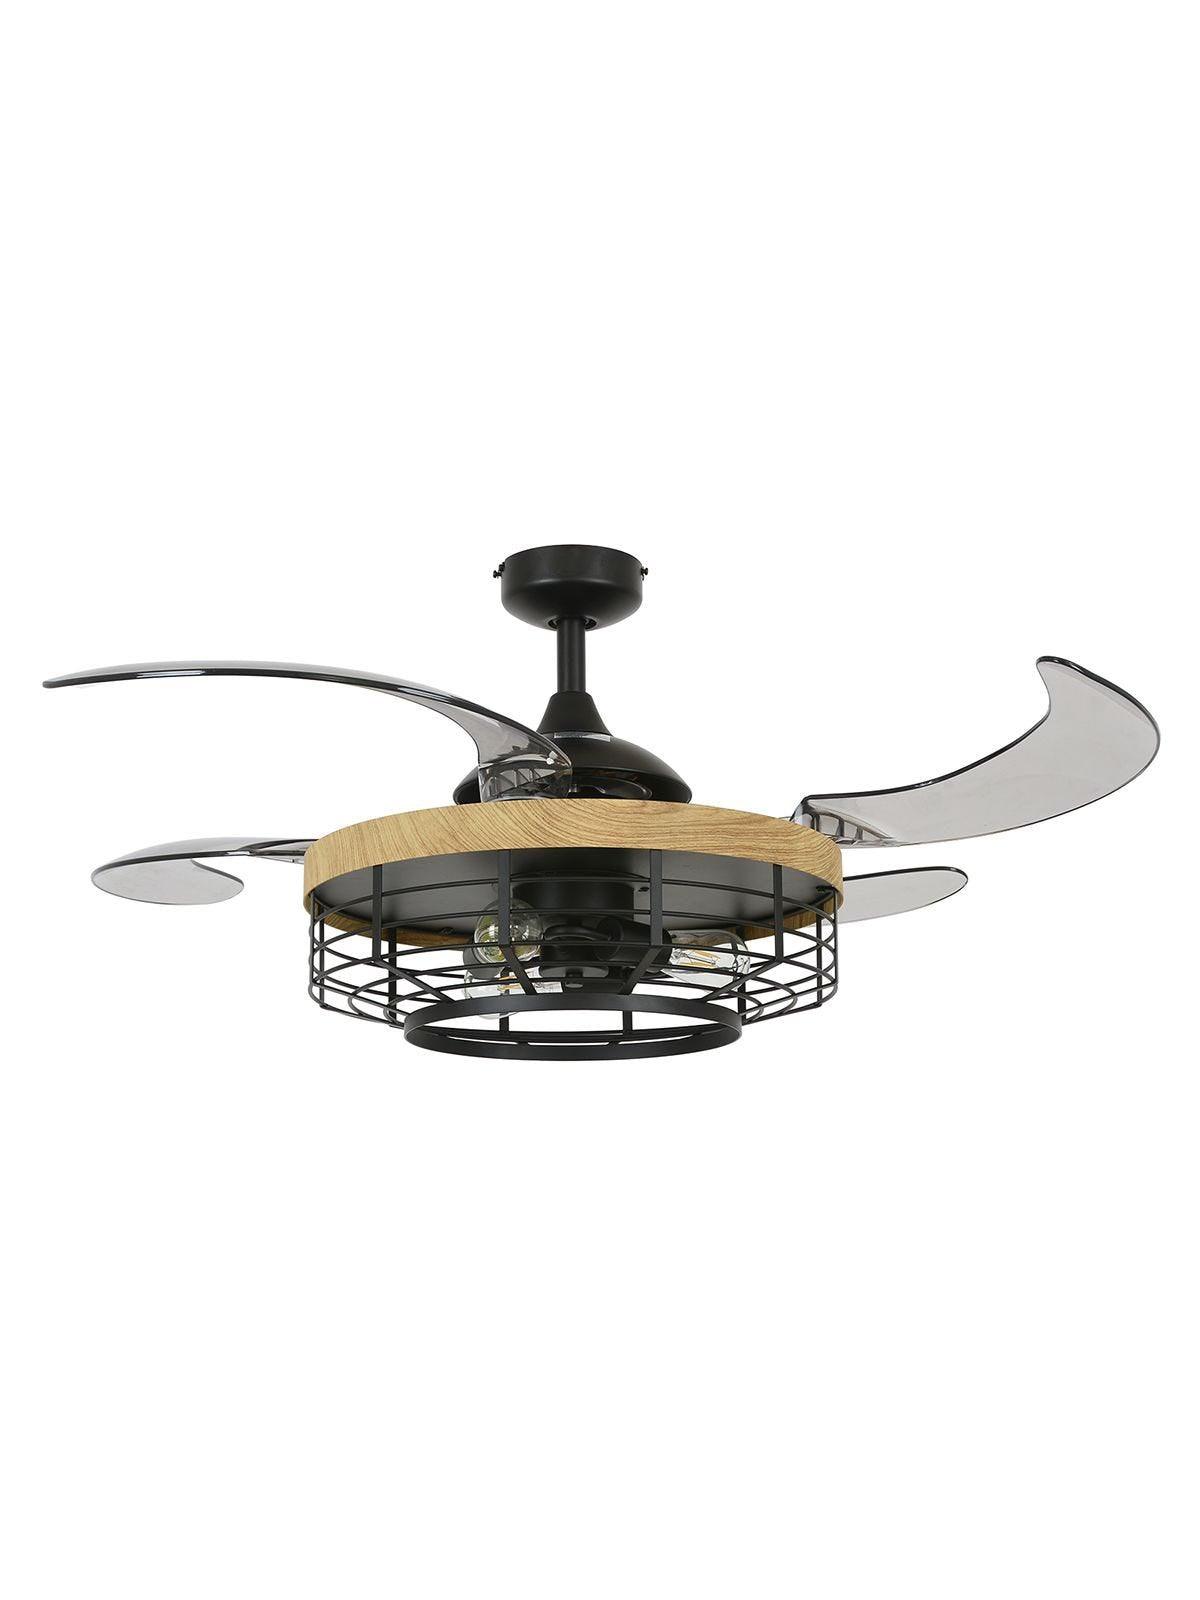 Steel with Open Air Frame Retractable Blade Ceiling Fan - LV LIGHTING